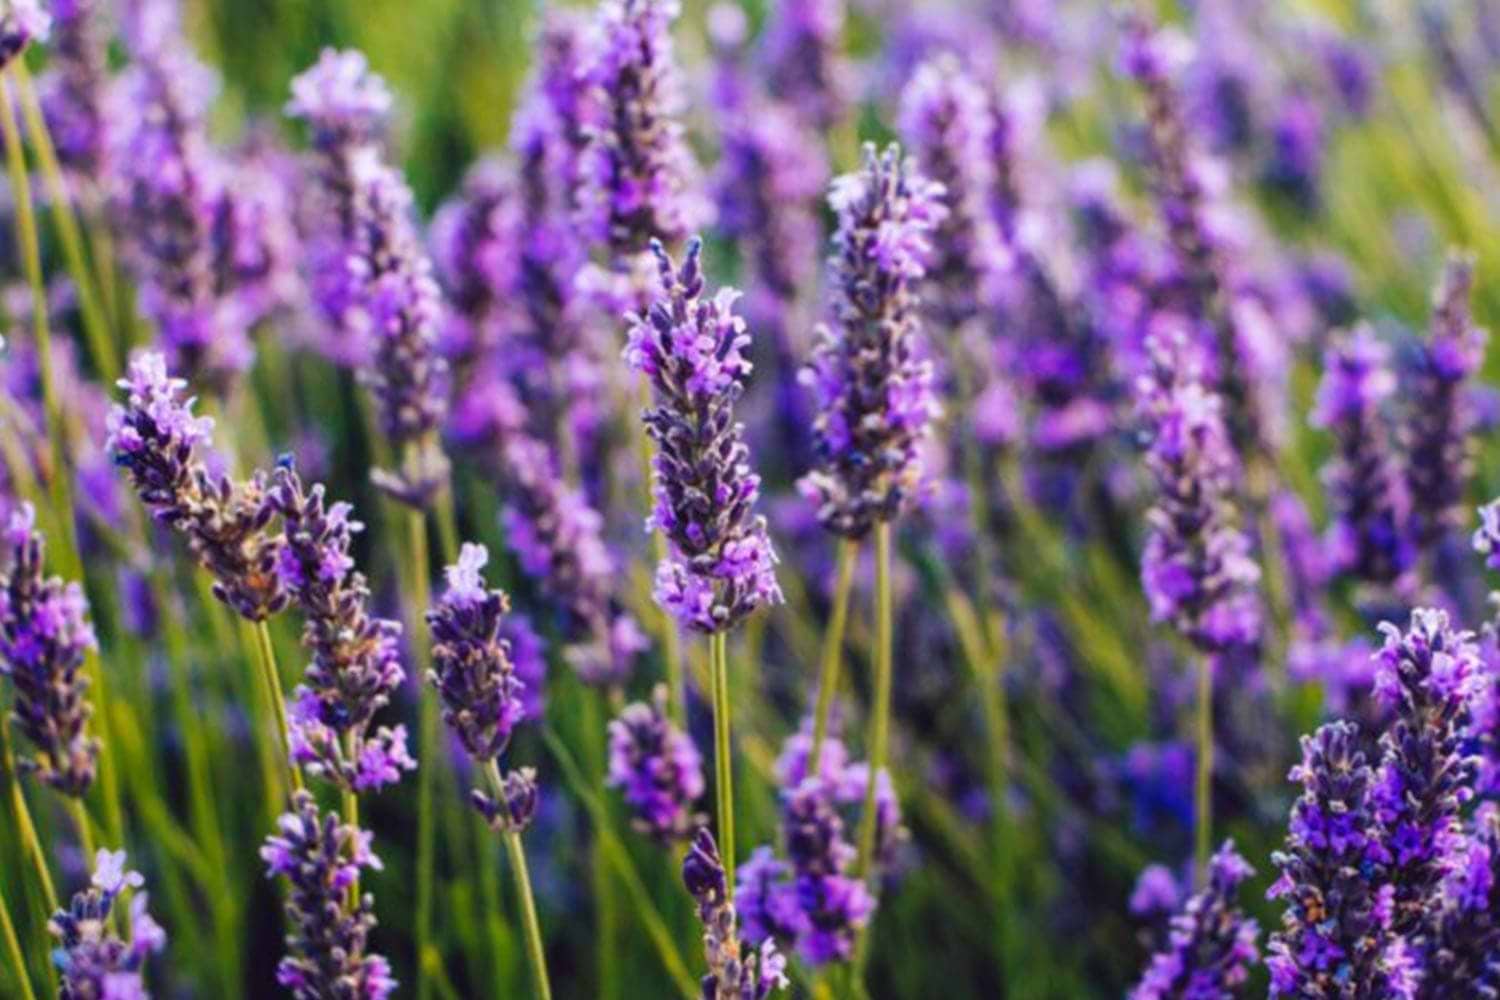 Lavender for stress relief and relaxation